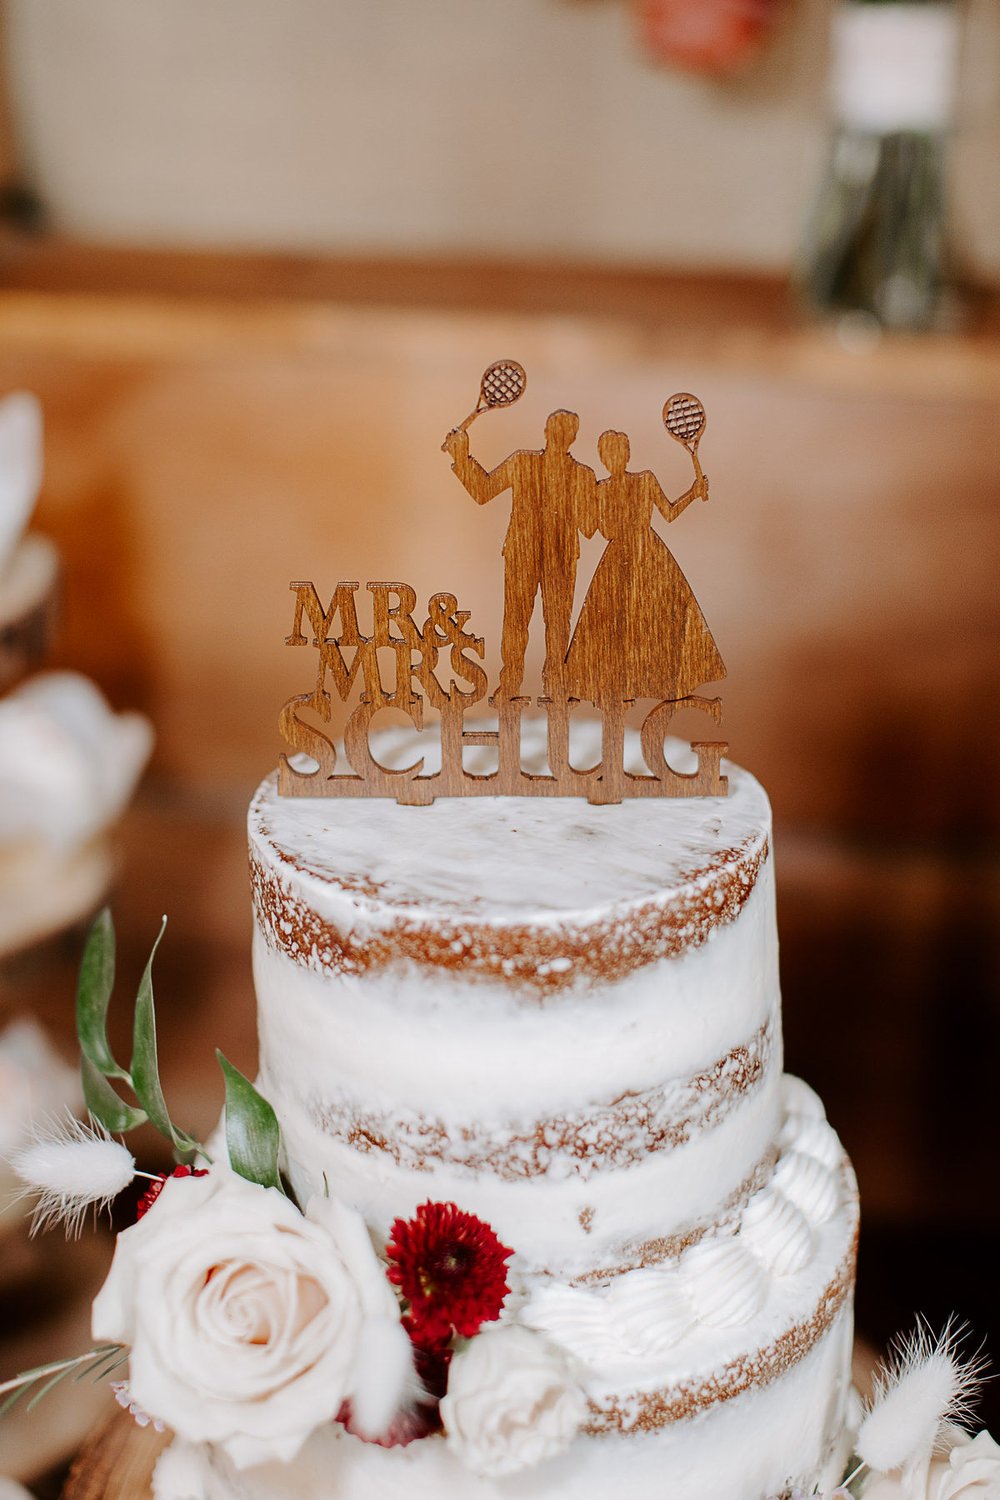 Mr and Mrs wedding personalized cake topper at Lancaster, Pennsylvania wedding